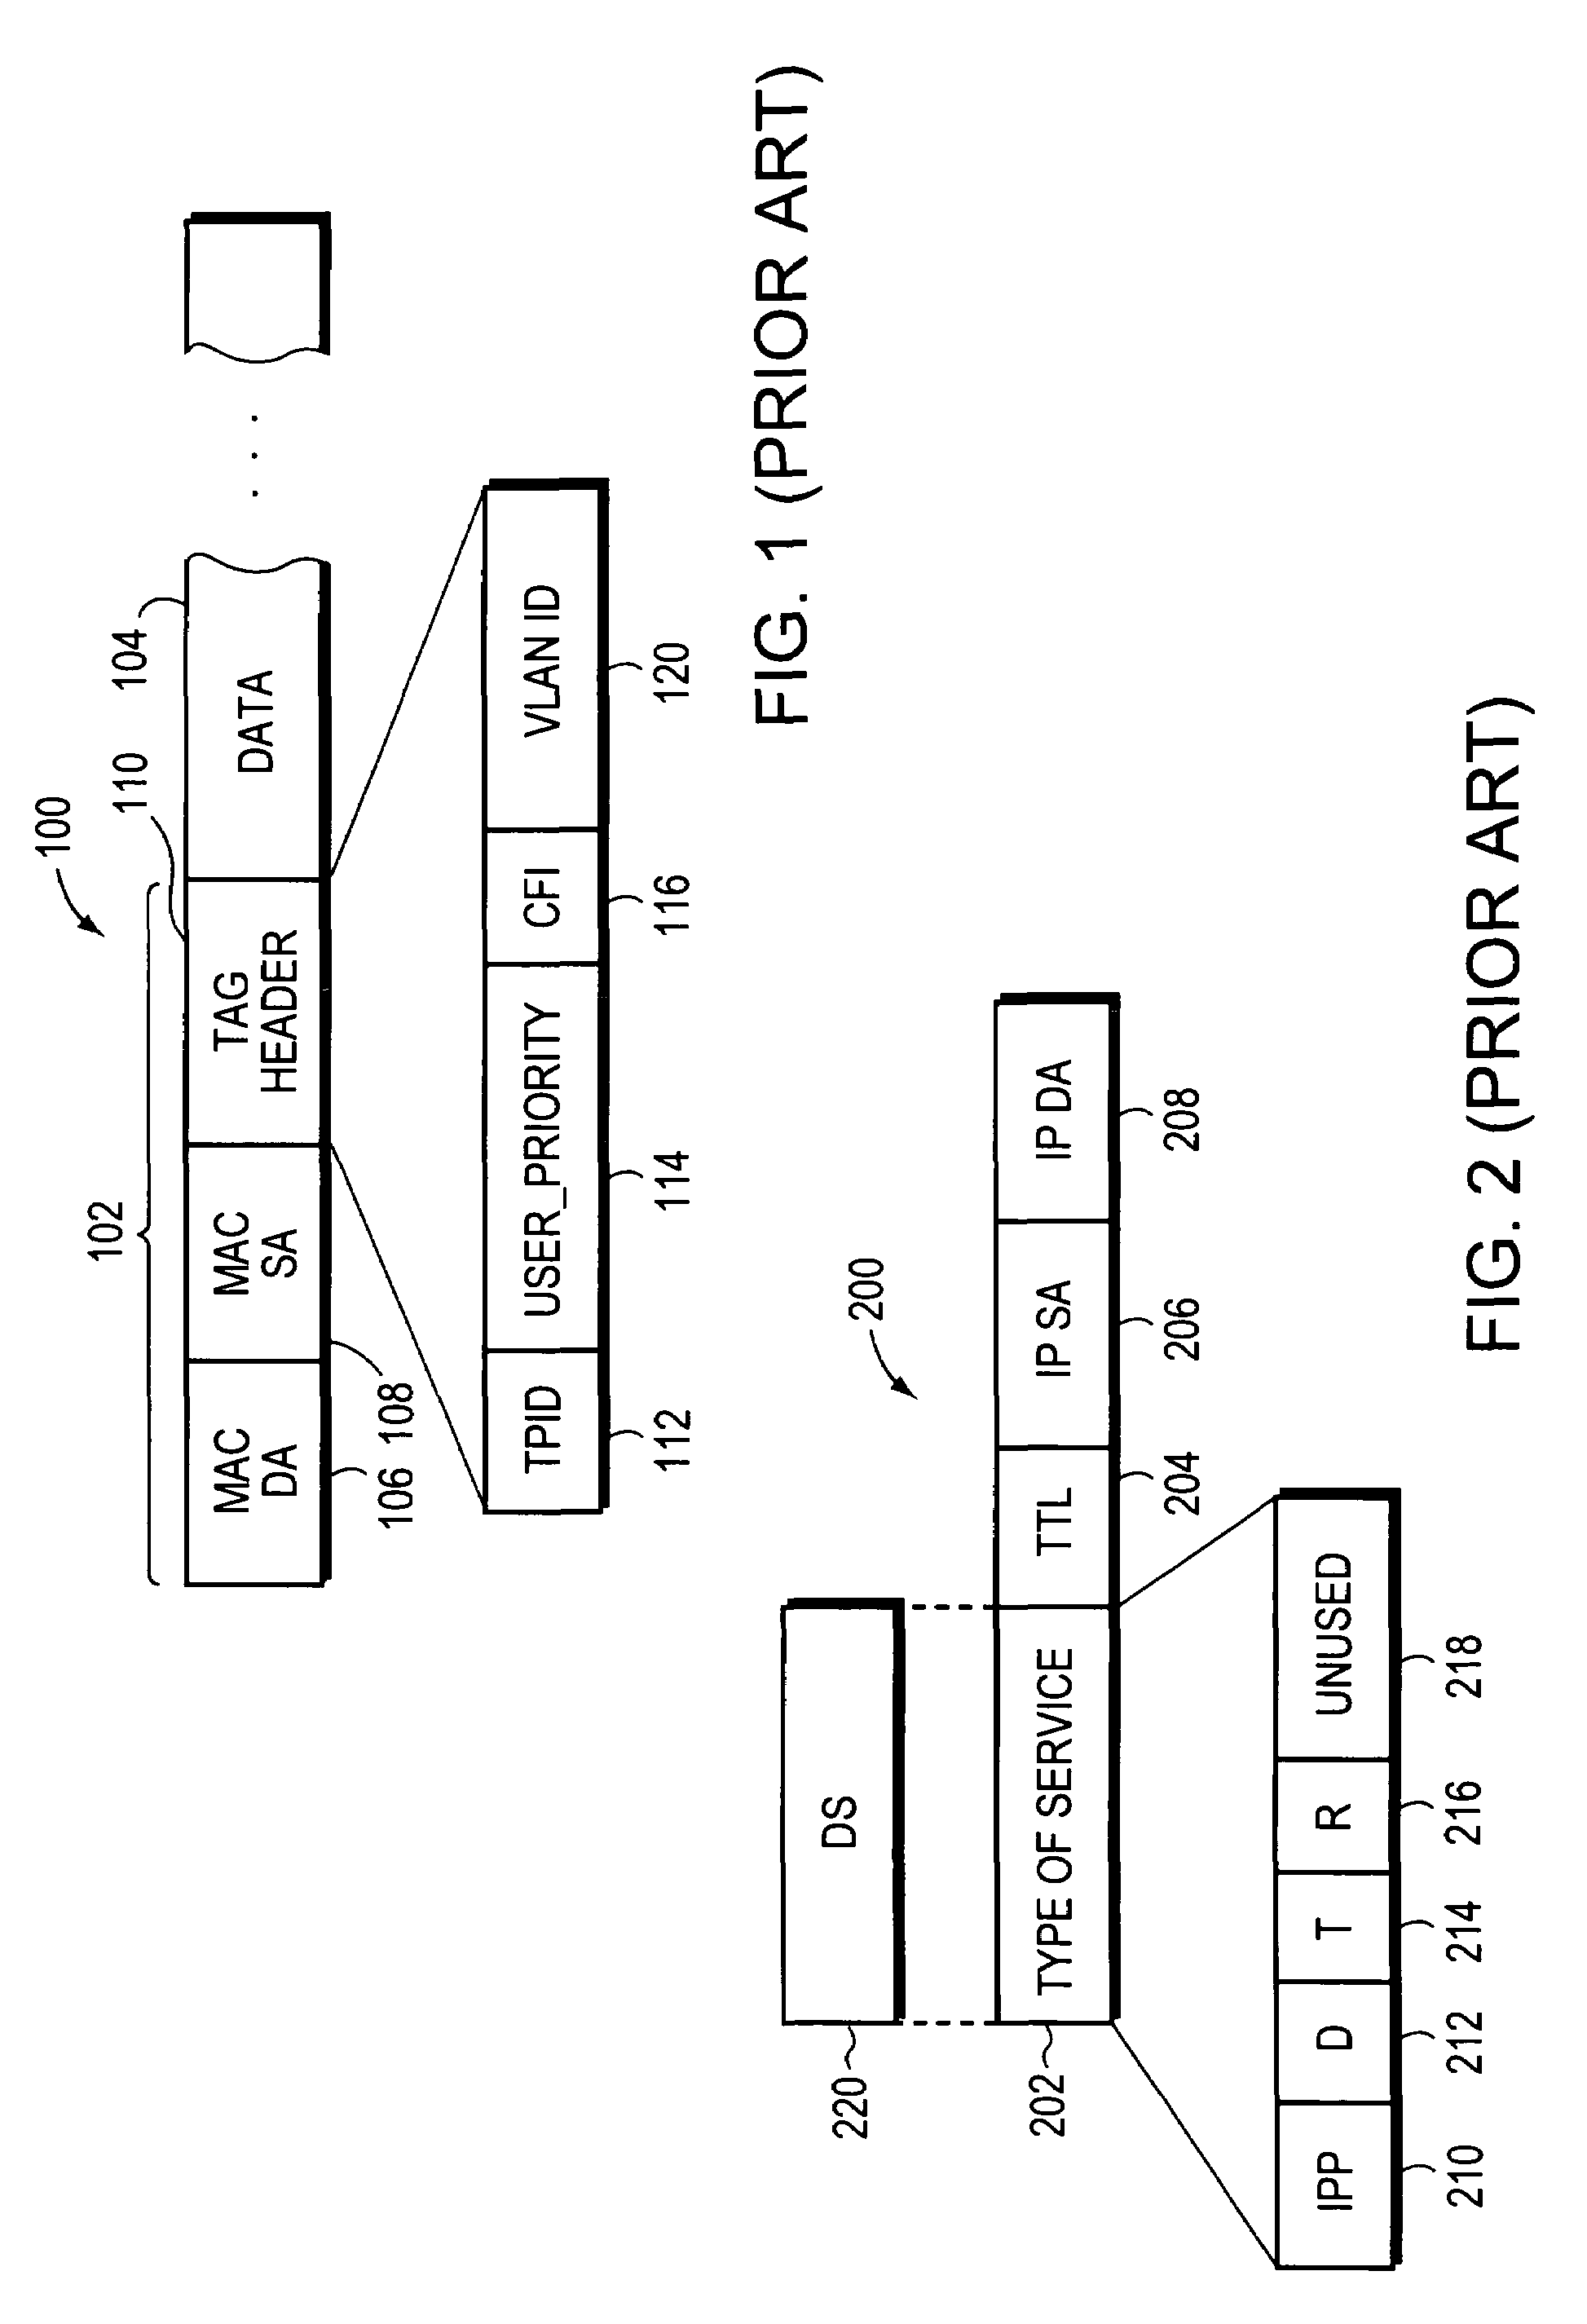 Method and apparatus for defining and implementing high-level quality of service policies in computer networks